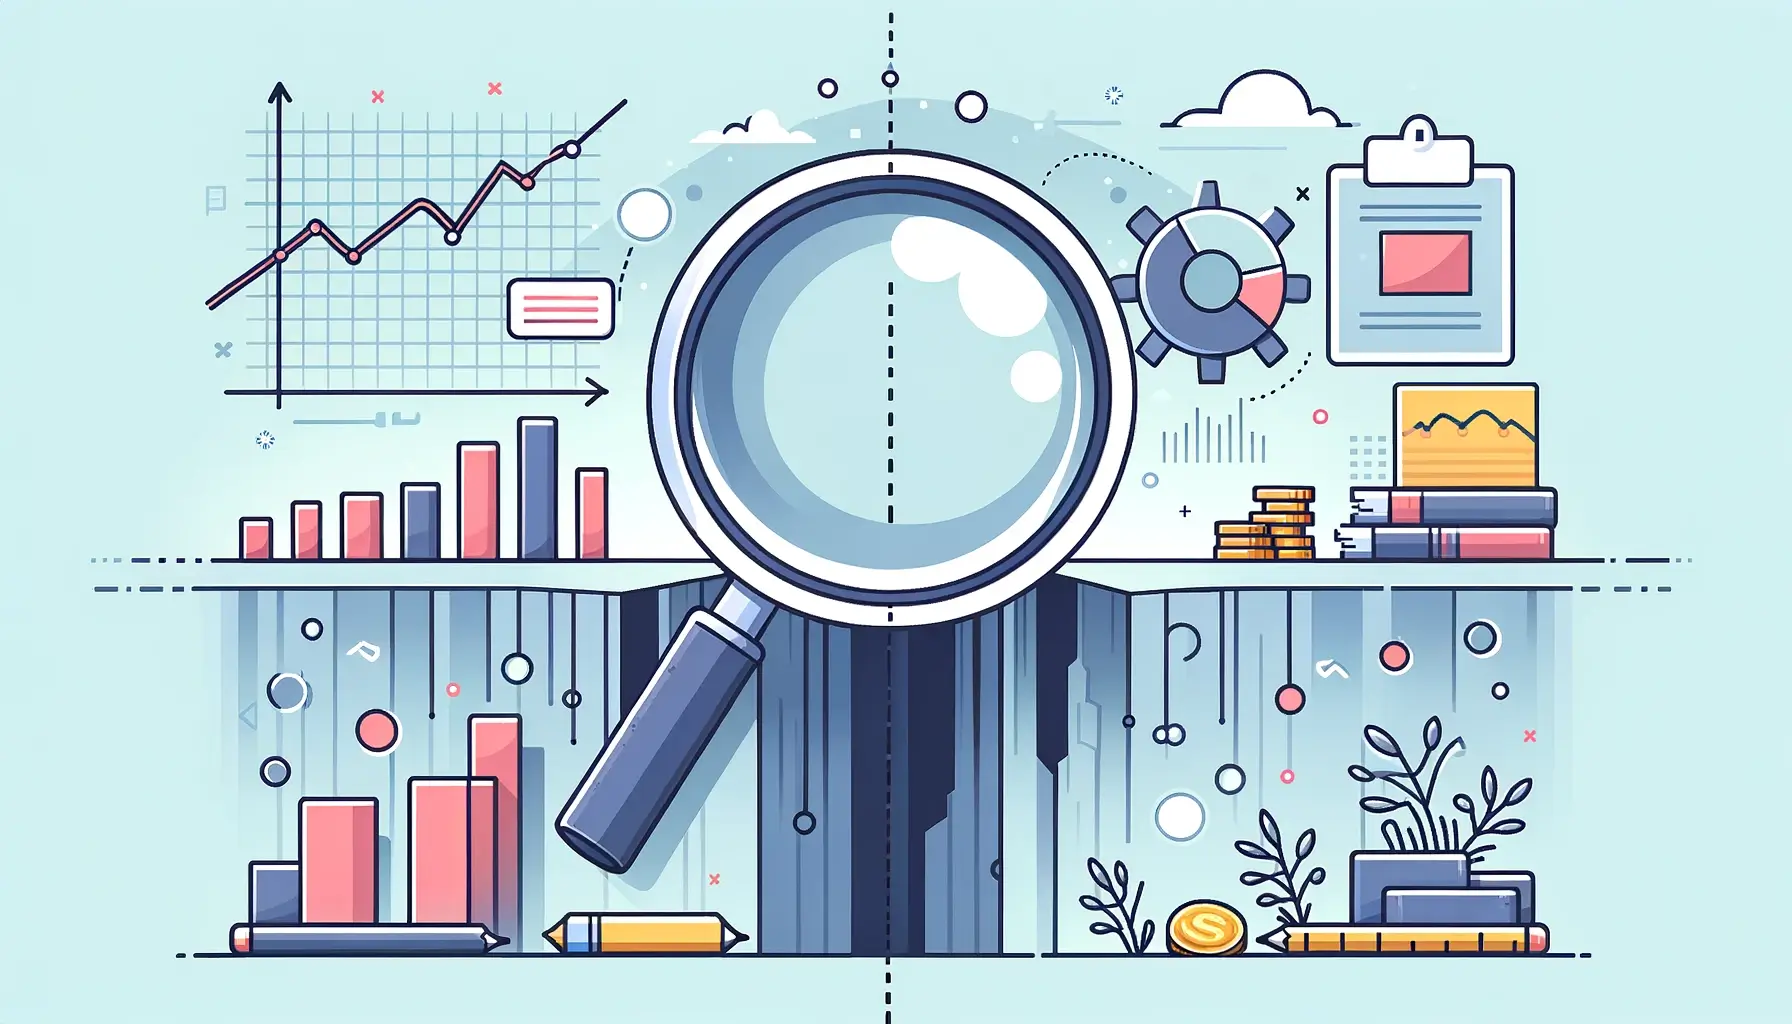 Illustration of a magnifying glass positioned between a gap against a backdrop of graphs and charts, symbolizing detailed research in business and economic development. The image represents the thorough analysis essential for entrepreneurs in real estate and other business ventures, highlighting the importance of market research and economic growth for successful entrepreneurship.